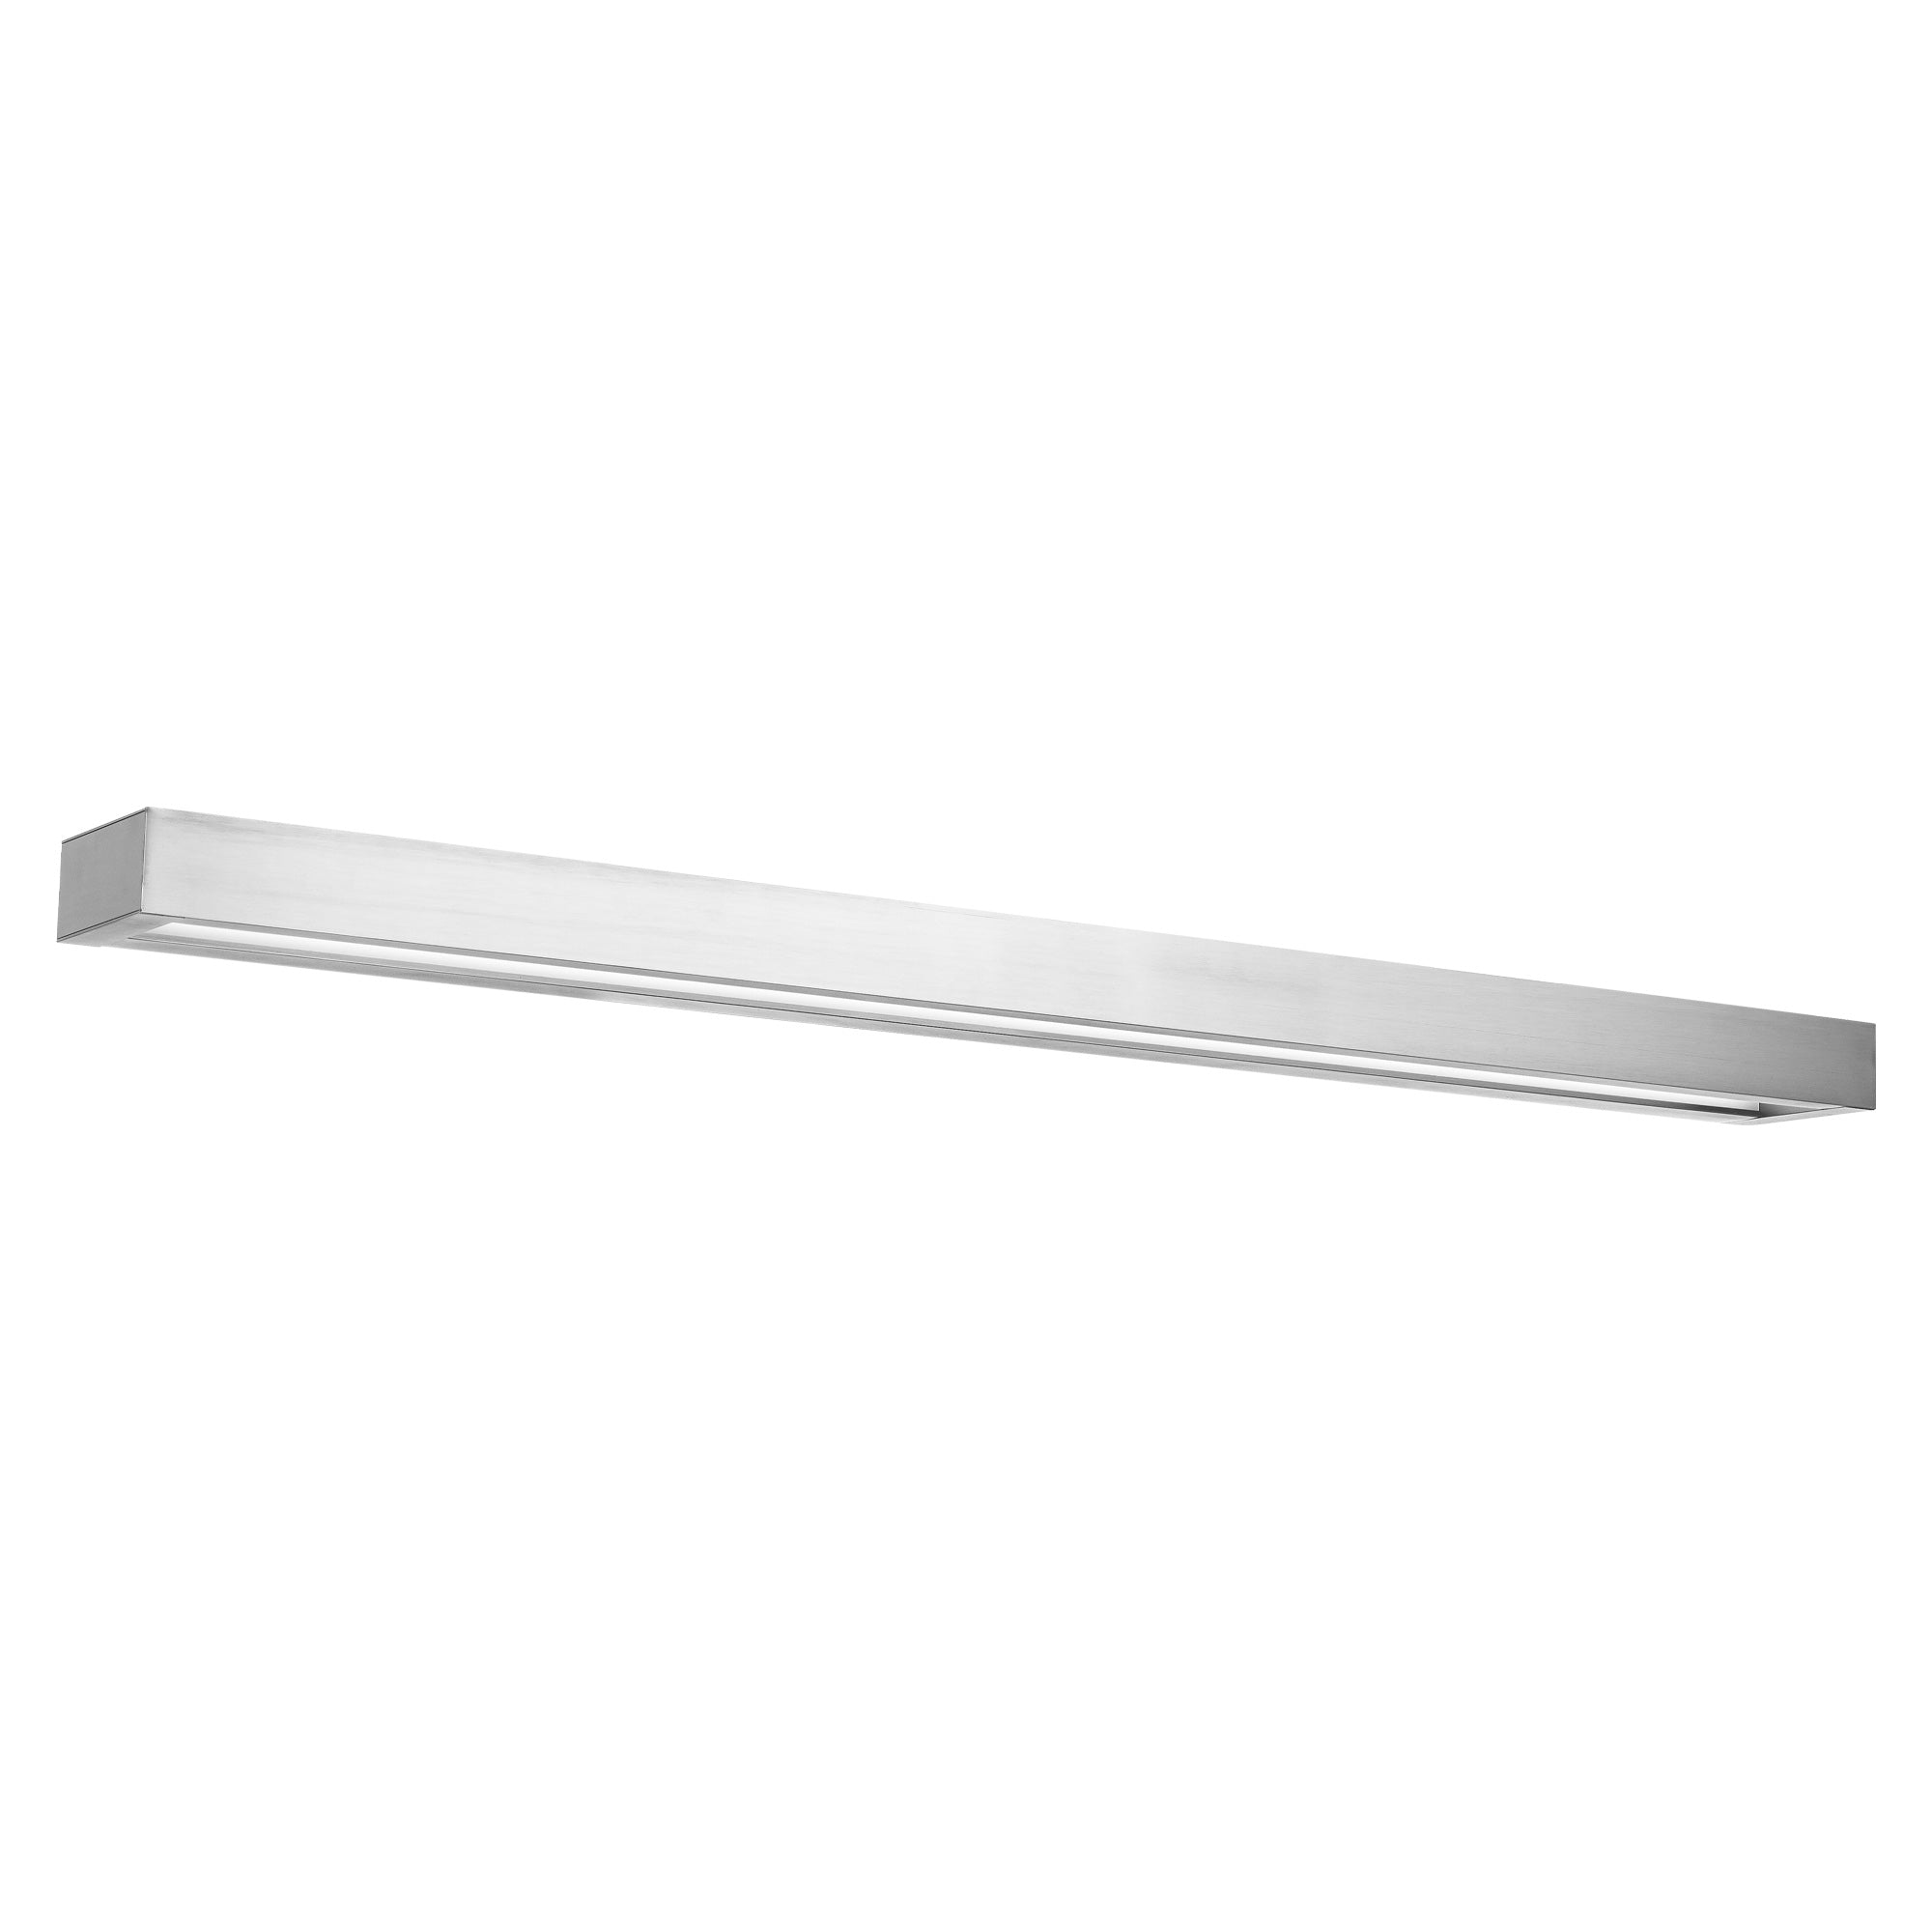 OPEN BAR Bathroom sconce Nickel INTEGRATED LED - WS-52137-30-BN | MODERN FORMS